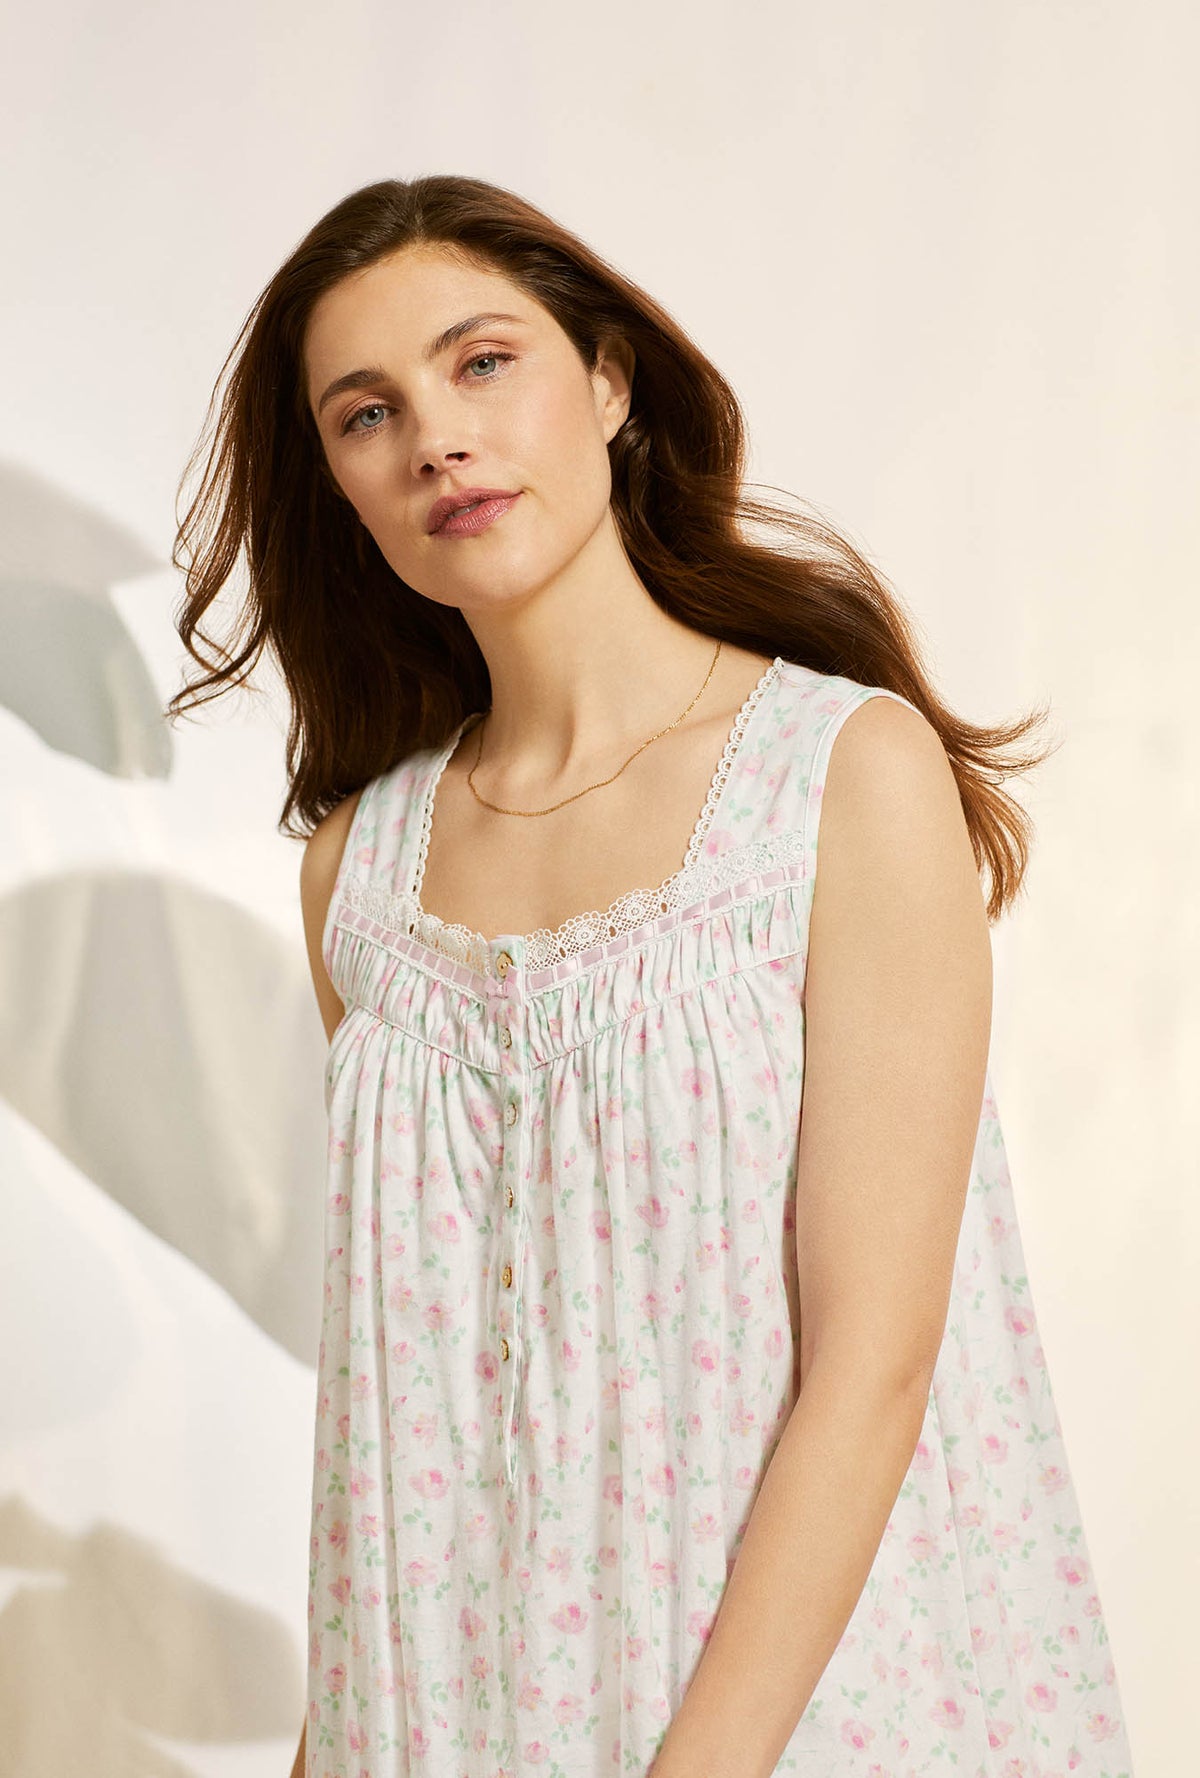 A lady wearing white sleeveless cotton knit short nightgown with petal dreams.